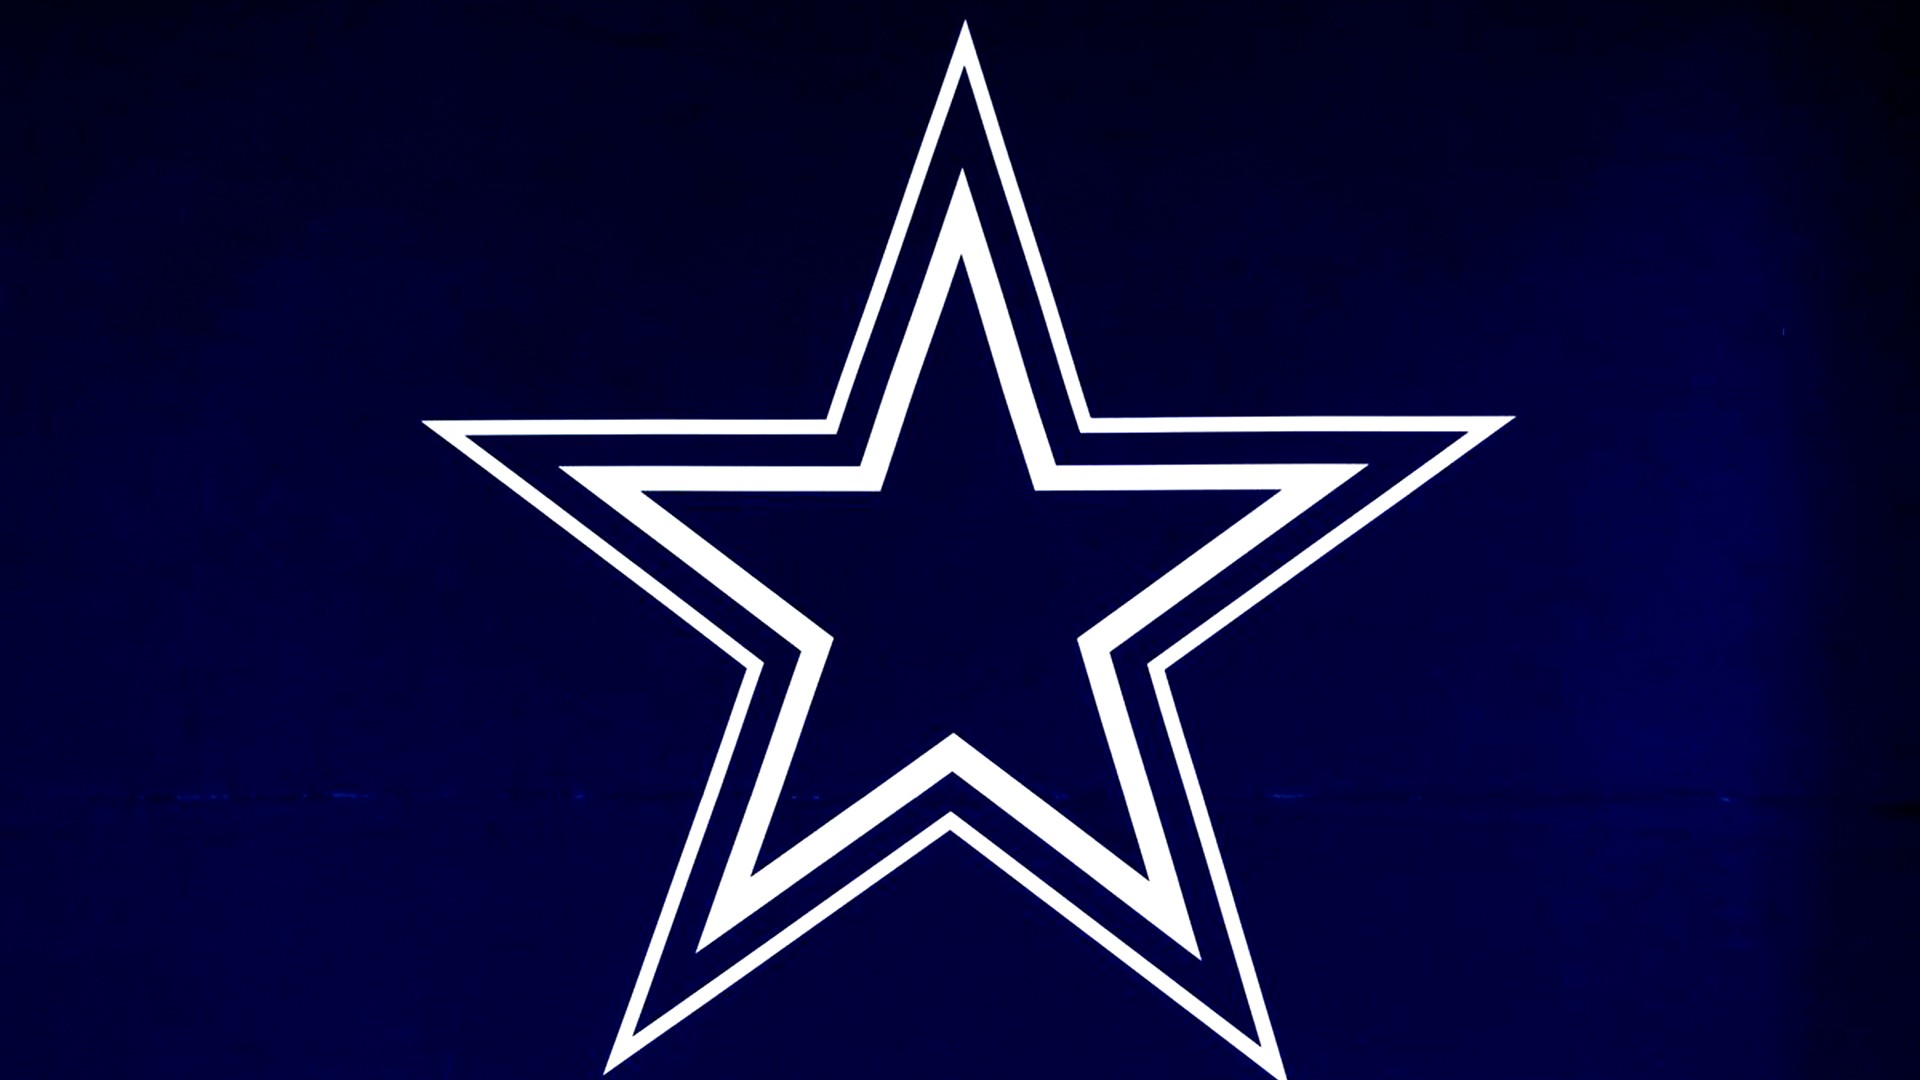 Dallas Cowboys Wallpaper For Desktop with high-resolution 1920x1080 pixel. You can use and set as wallpaper for Notebook Screensavers, Mac Wallpapers, Mobile Home Screen, iPhone or Android Phones Lock Screen